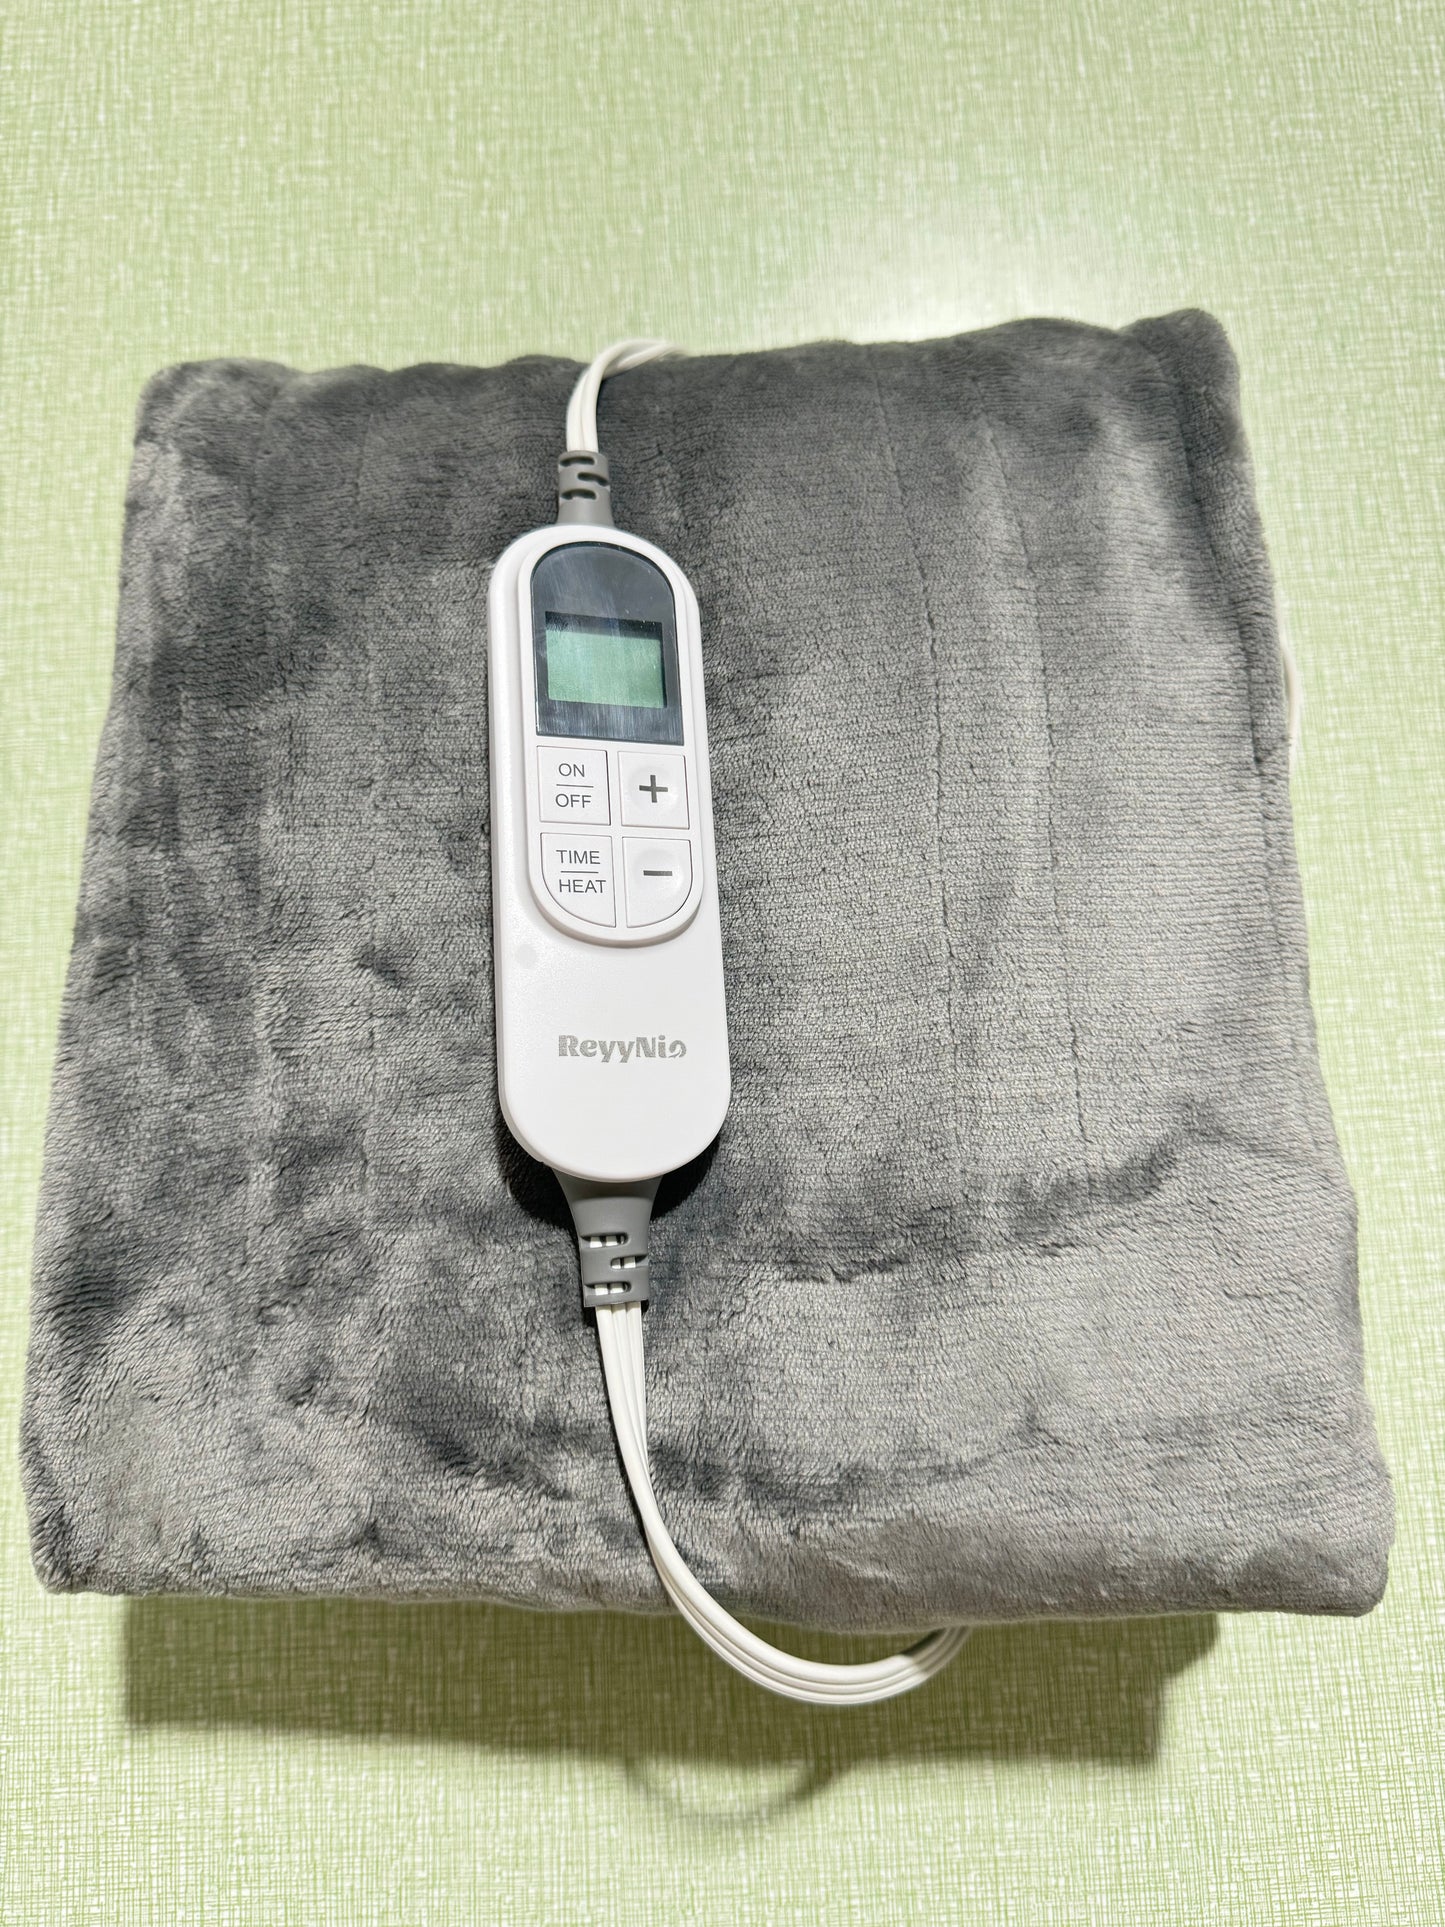 ReyyNio Electric Blanket 72 "x84" Full Size Soft Cozy Flannel Heated Blanket with 4 Levels of Heat and 10 Hour Auto Off, Machine Washable -Light Grey